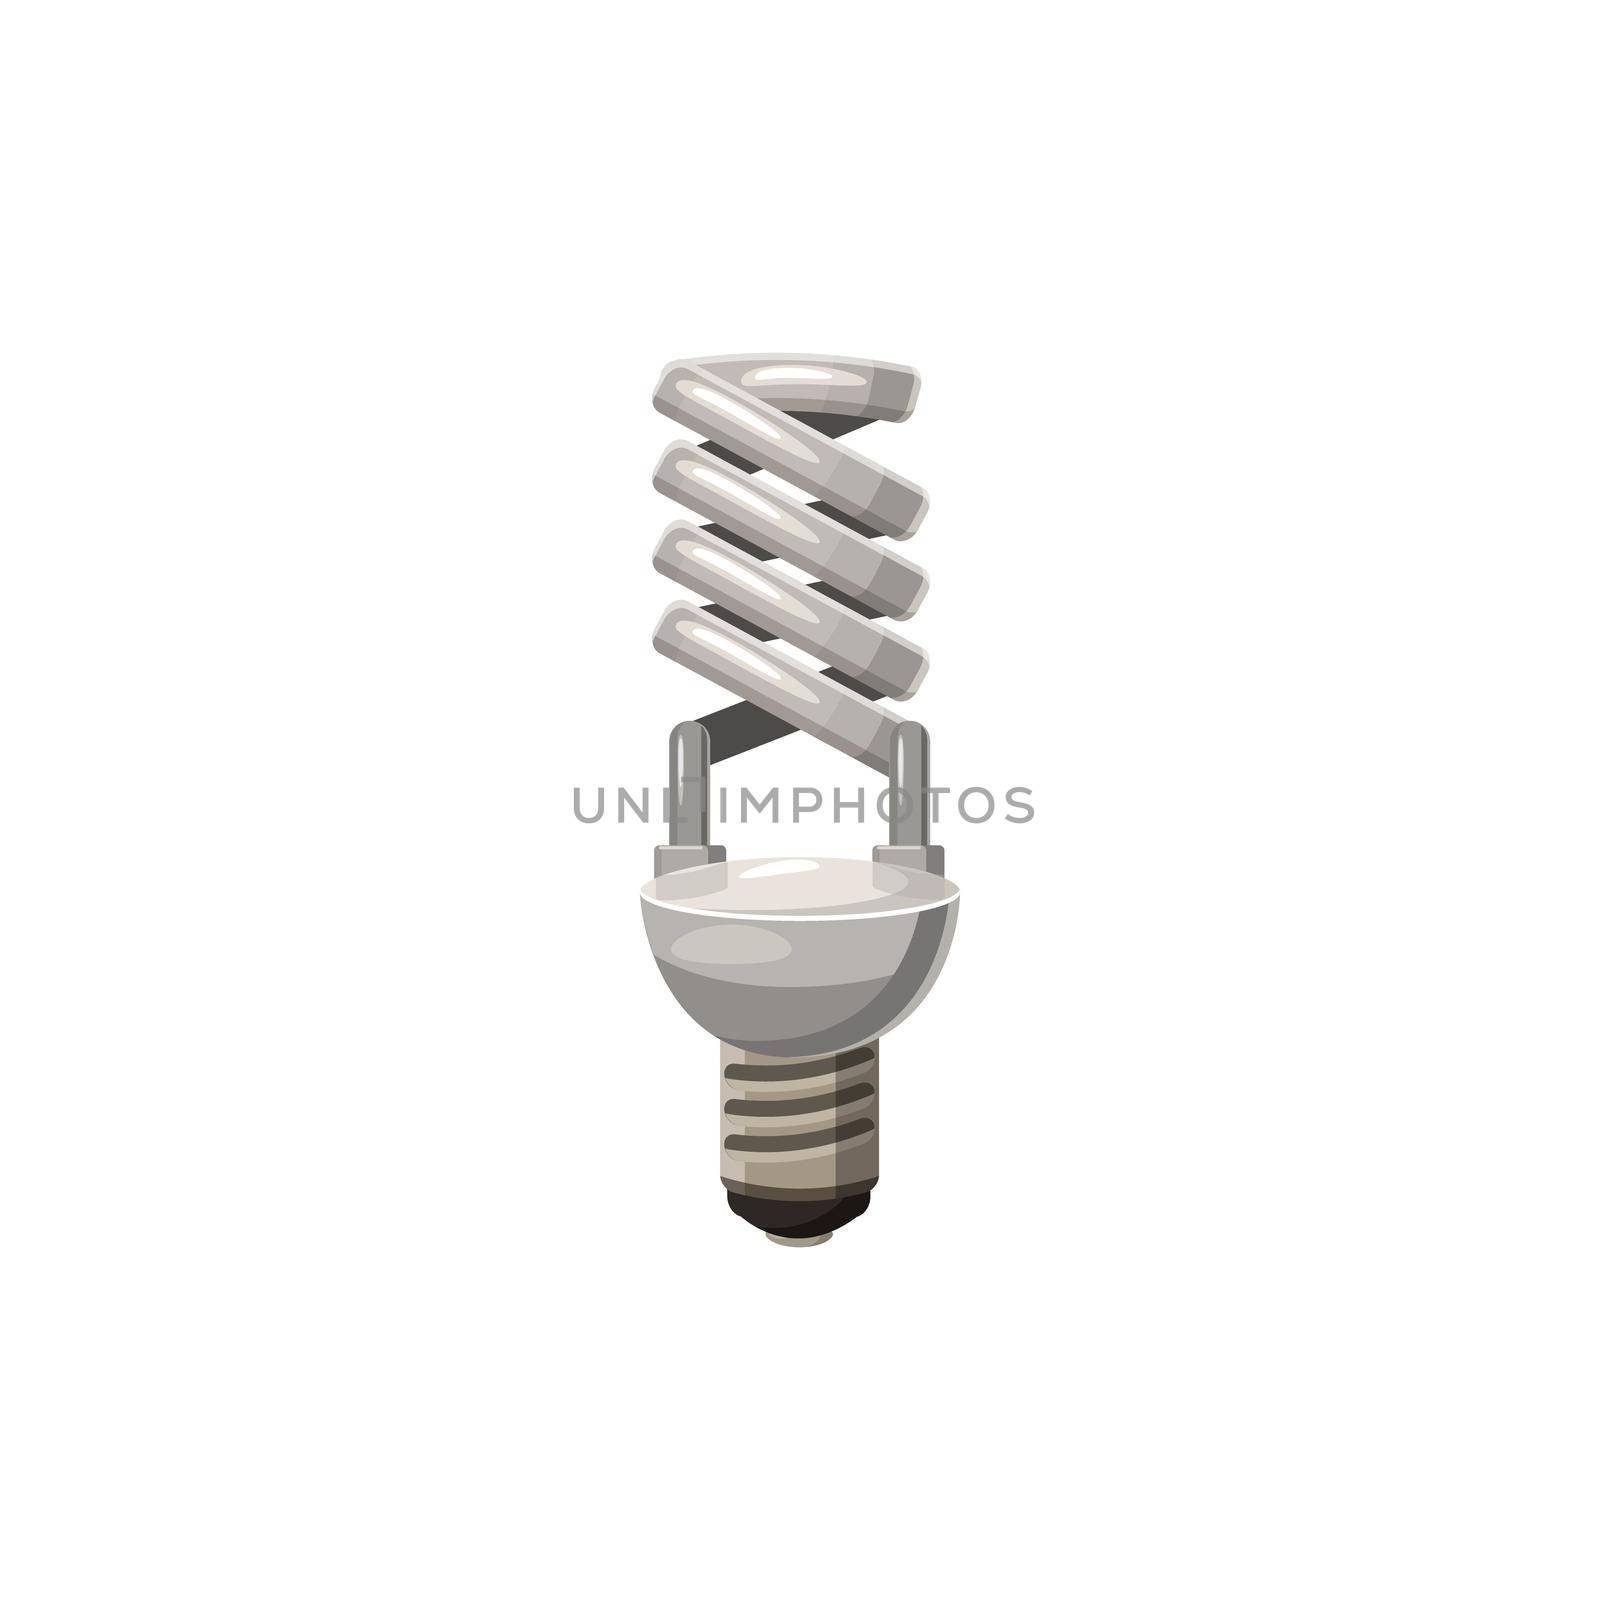 Efficient powersaving bulb icon in cartoon style on a white background